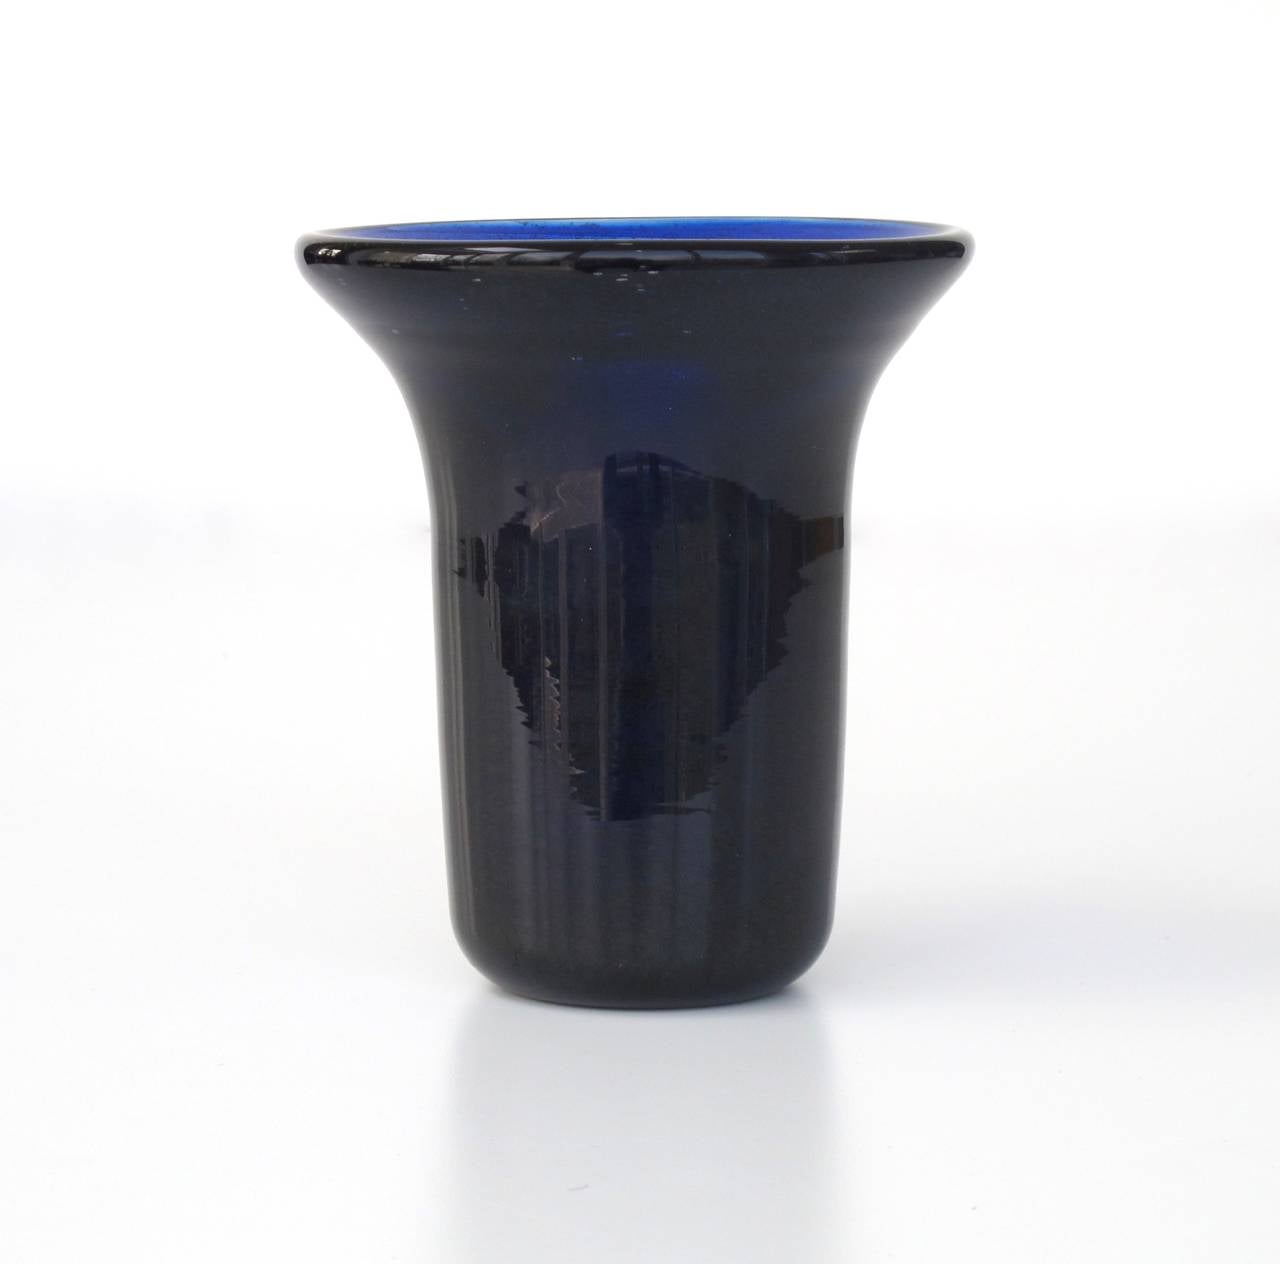 This one-off deep purple and blue colored thick glass vase was made by Chris Lebeau in January 1929 in Bohemia. It is part of the third and last series of glass objects Lebeau made in the Czechoslovakian region. The pieces from this series are